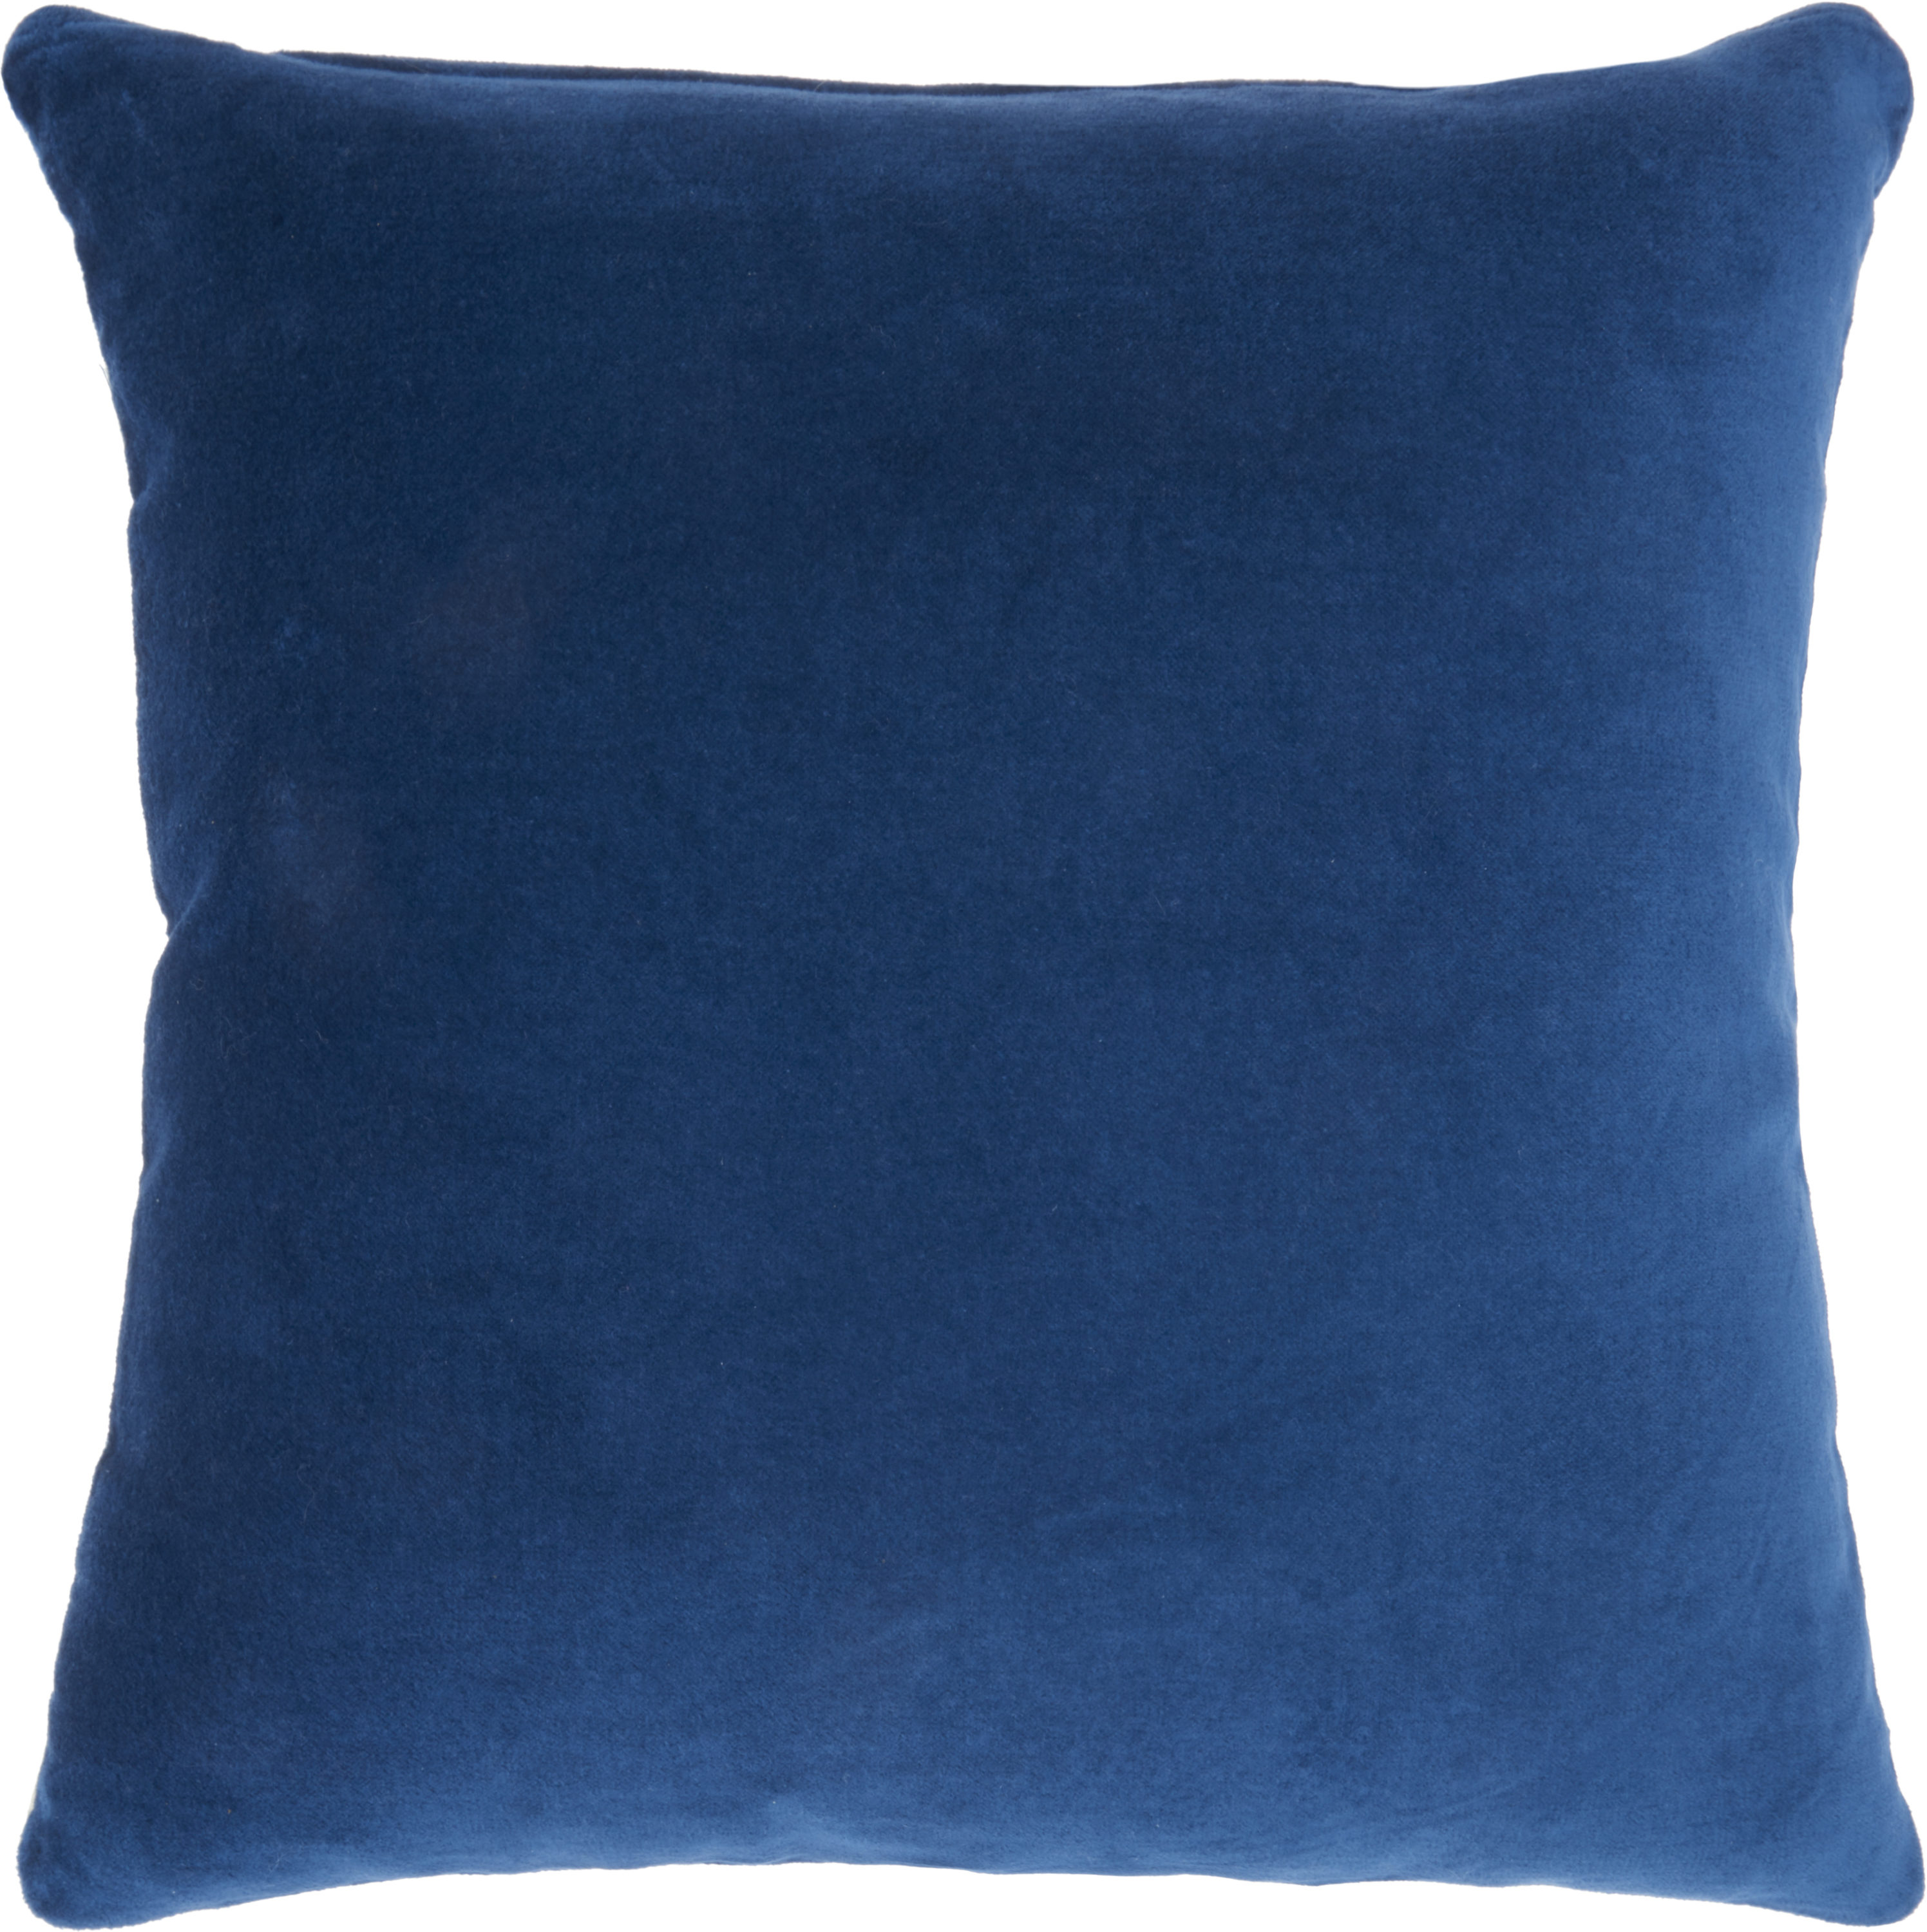 Monogram Pillow Navy Blue Cotton Canvas with Piping 16 x 16 Inches